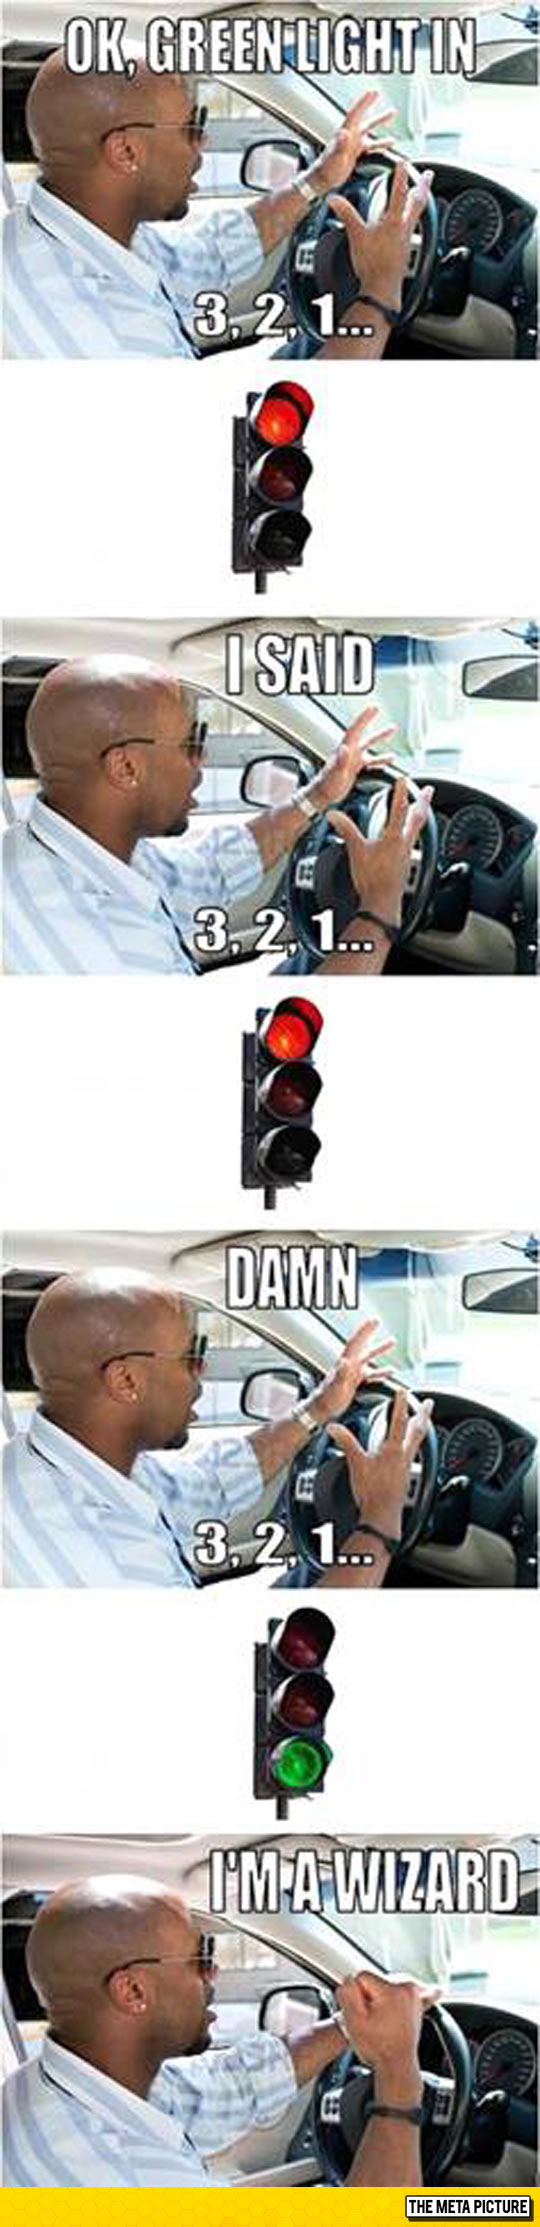 Every Time I Try To Predict The Traffic Light